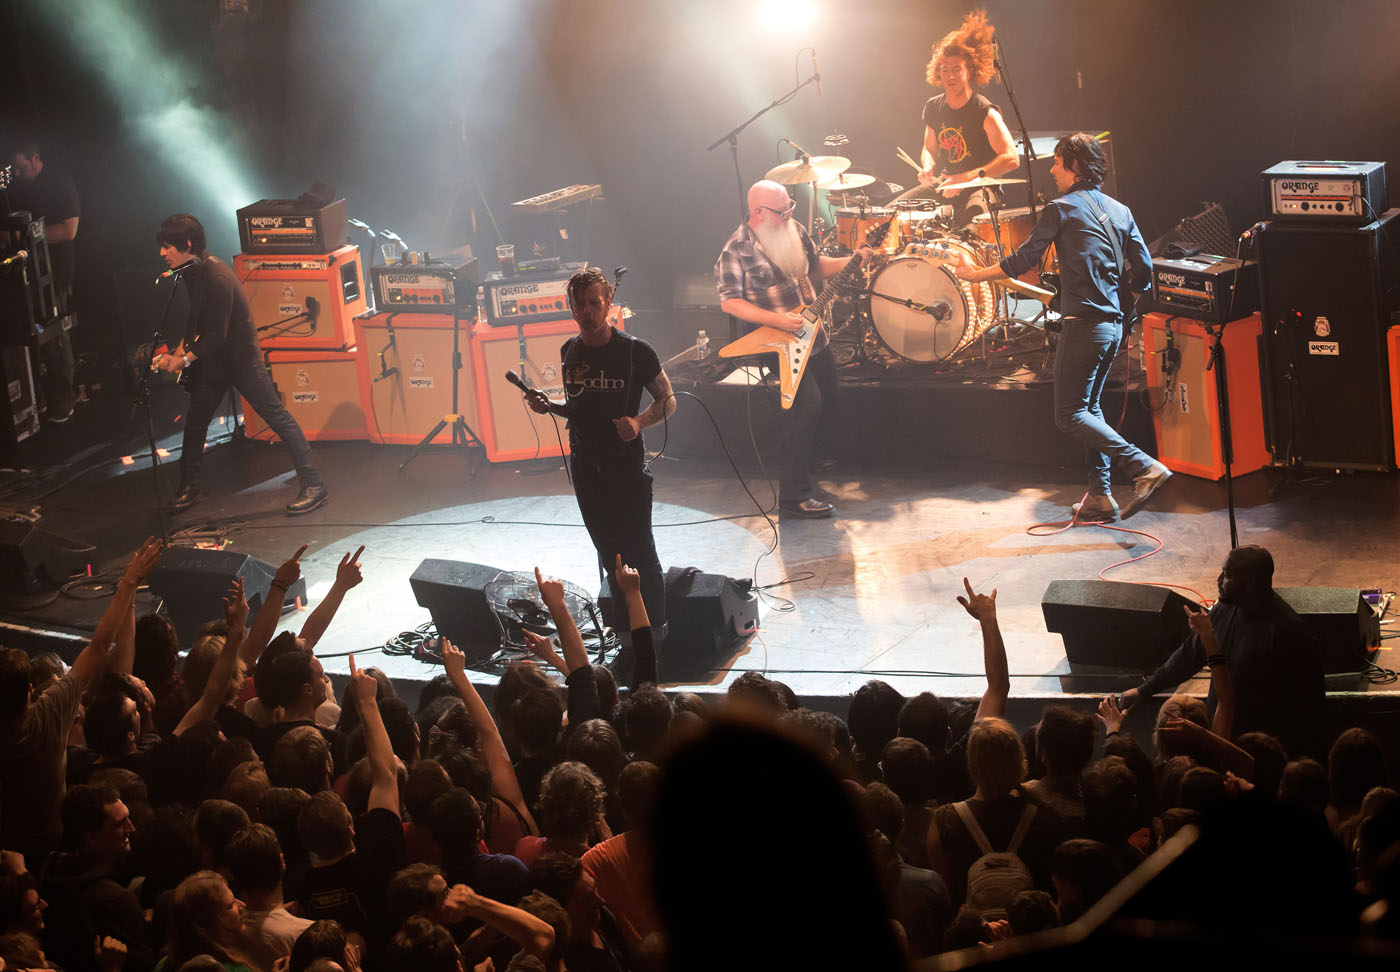 American rock group Eagles of Death Metal perform on stage on November 13, 2015 at the Bataclan concert hall in Paris, few moments before four men armed with assault rifles and shouting 